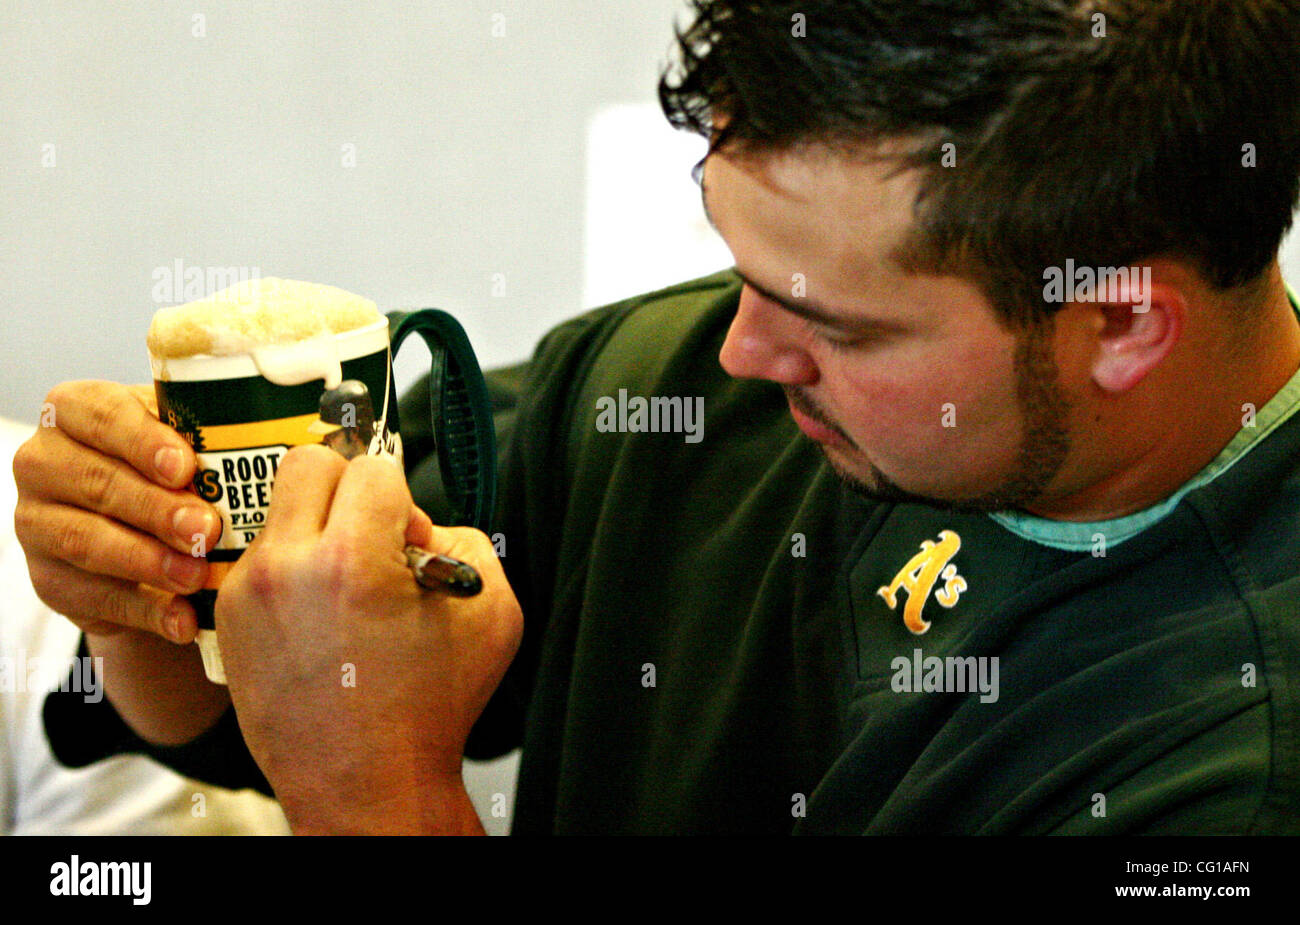 Oakland A's Nick Swisher autographs a mug at the 8th Annual MUG Root Beer Float Day to benefit the Juvenile Diabetes Research Foundation, at McAfee Coliseum, on Wednesday, August 1, 2007, in Oakland, California. (Anda Chu/The Fremont Argus) Stock Photo